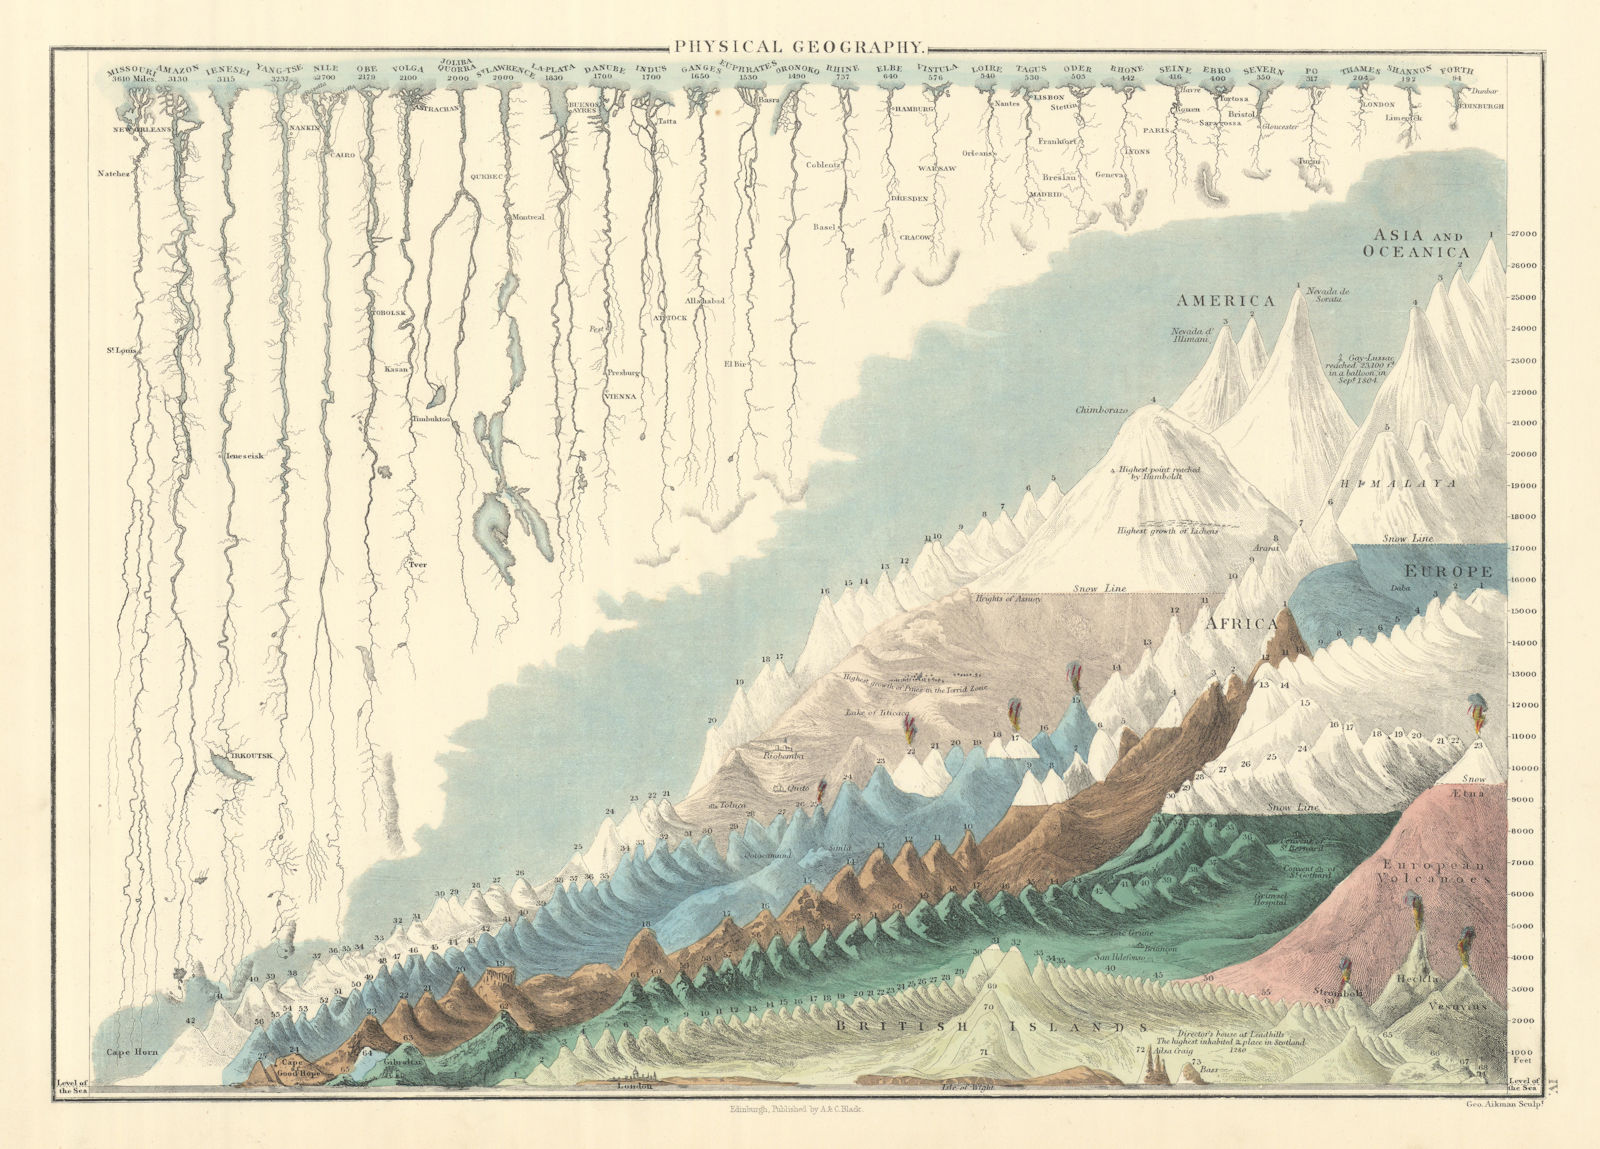 Rivers and mountains. Physical geography. World. GEORGE AIKMAN 1854 old map